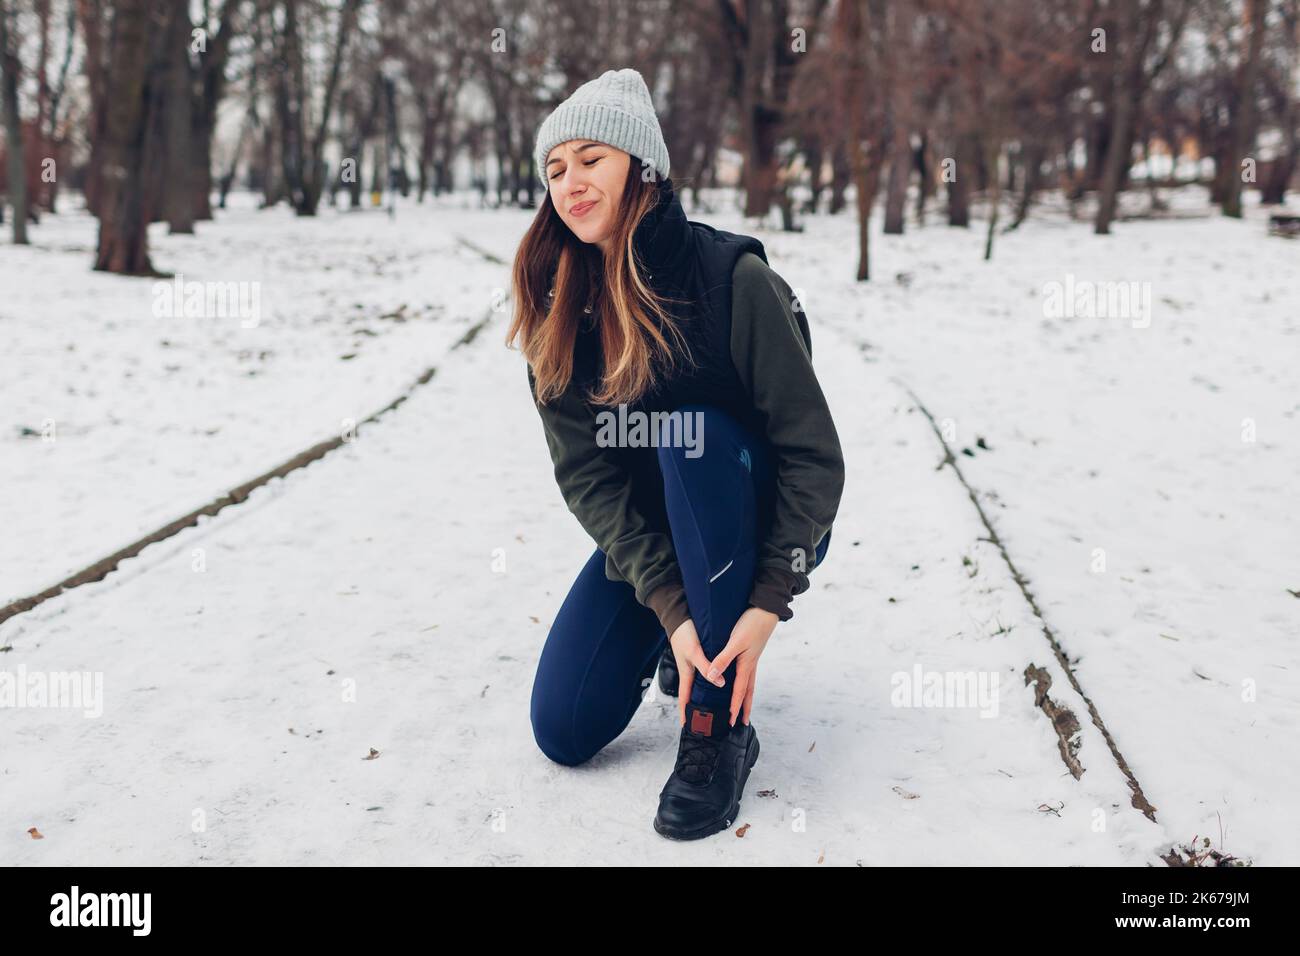 Runner injured leg during training in snowy winter park. Woman feels hurt, ankle pain. Dangerous exercises outdoors during cold weather Stock Photo